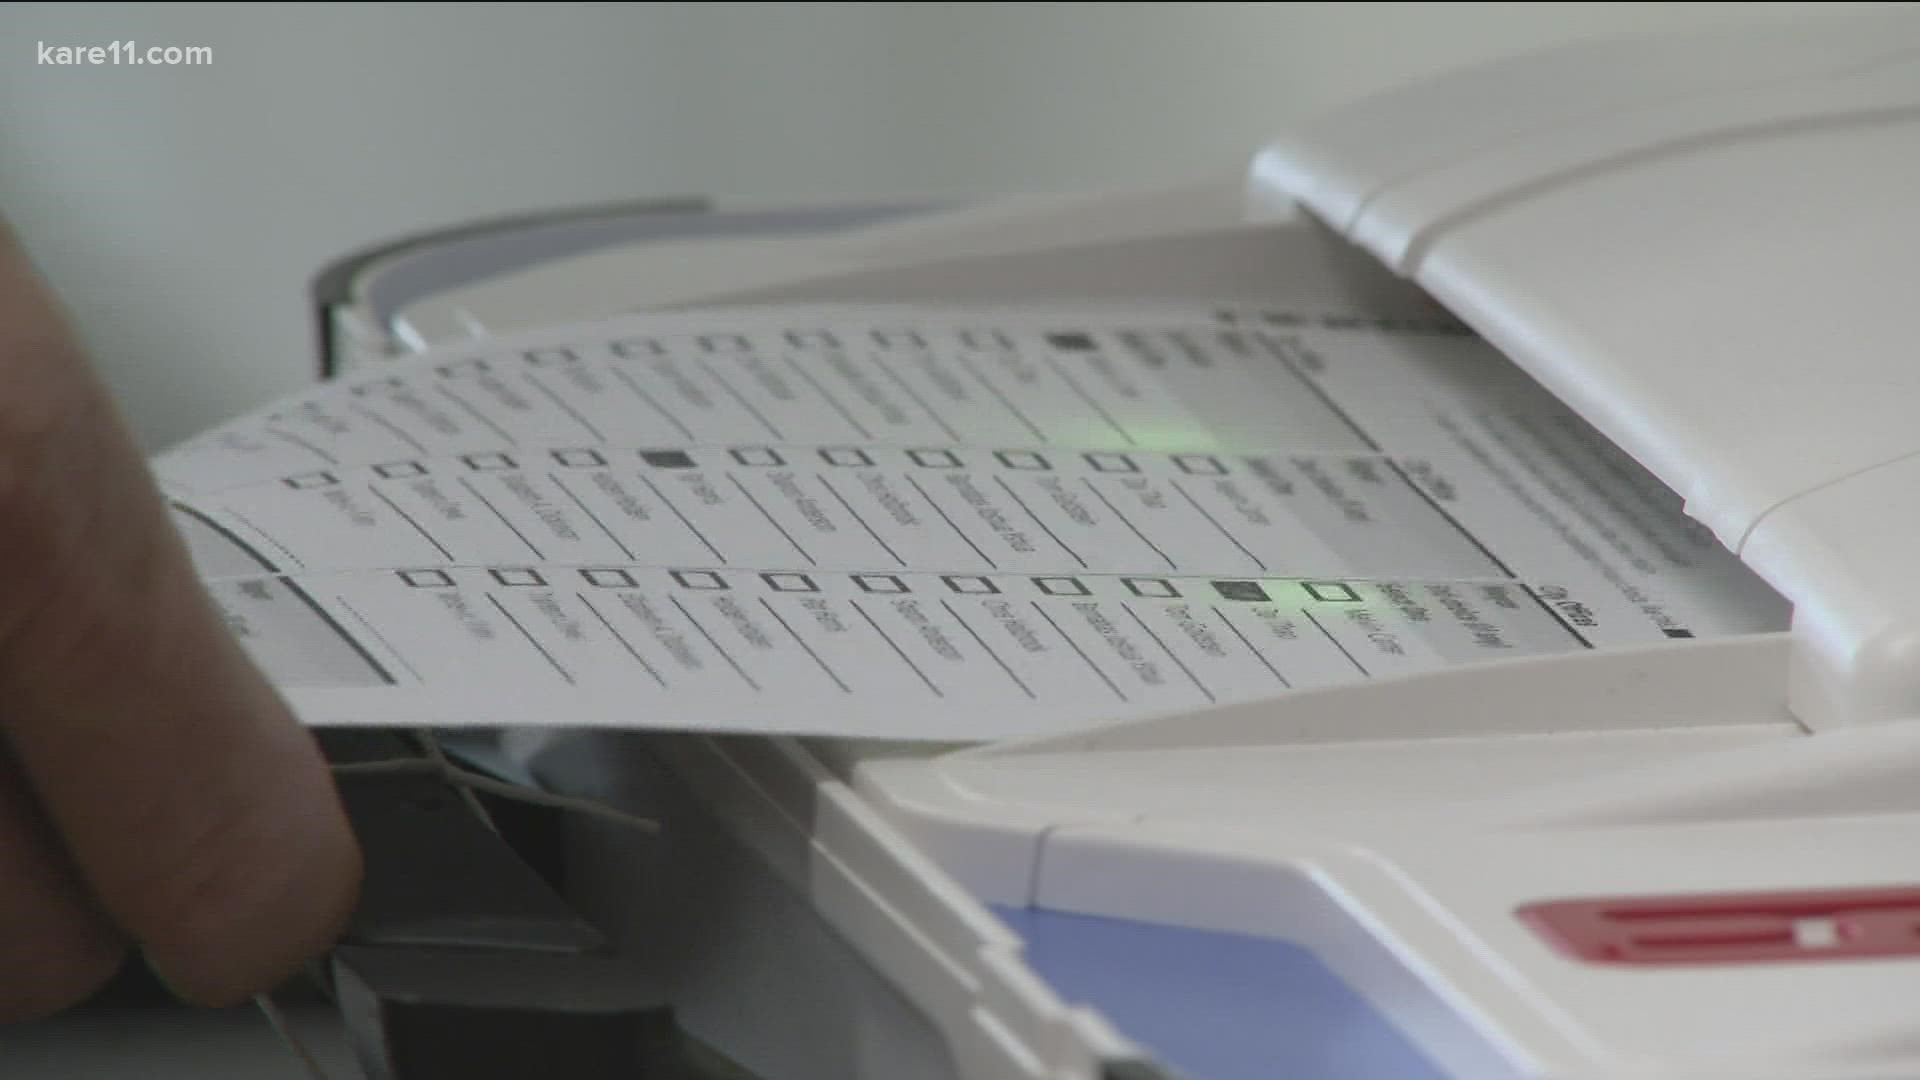 County elections officials have already printed all 350,000 ballots with the language.